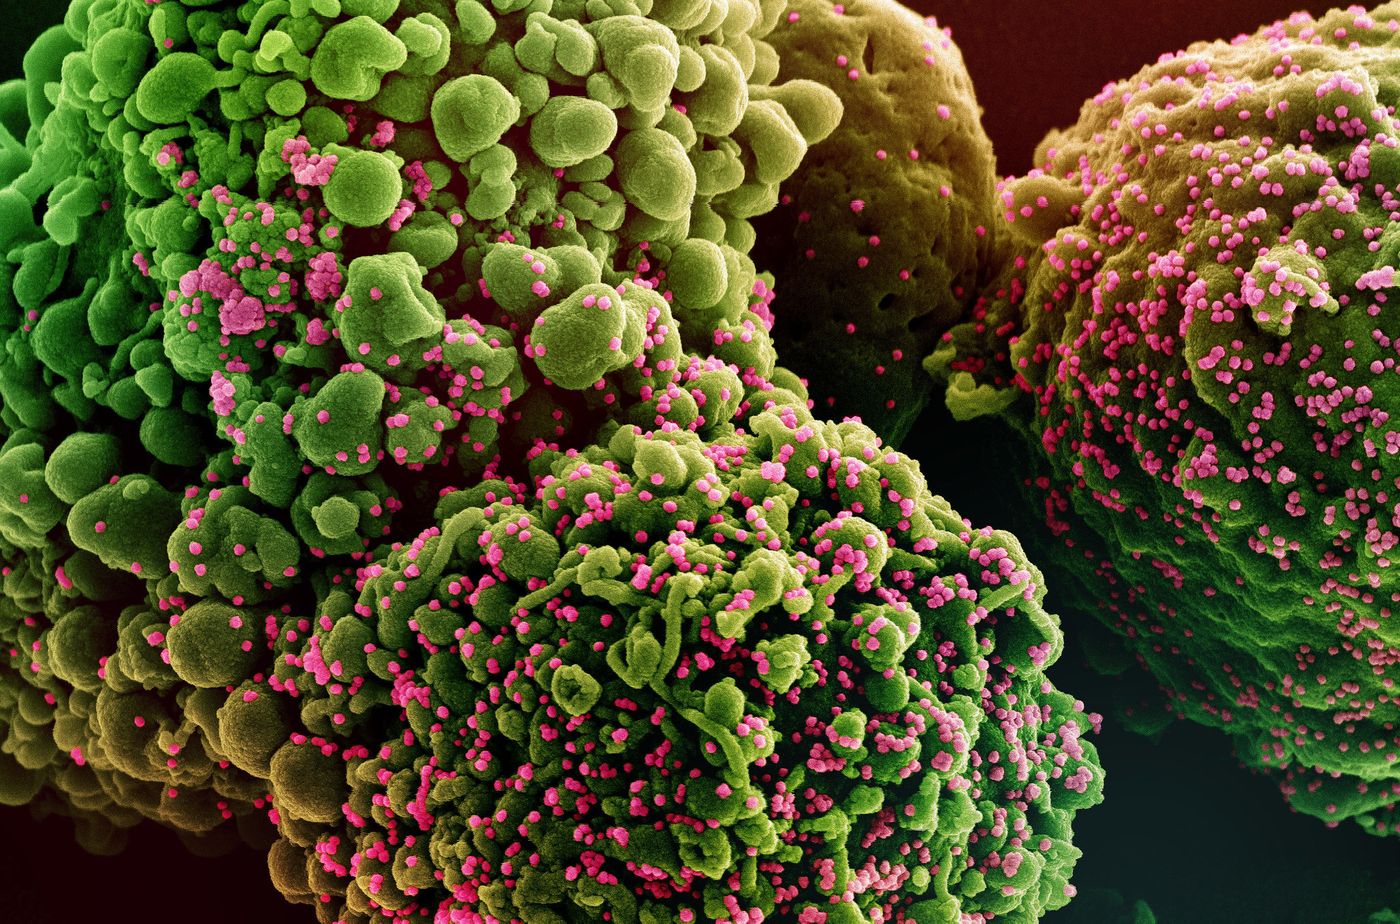 Colorized scanning electron micrograph of a cell infected with the Omicron strain of SARS-CoV-2 virus particles (pink), isolated from a patient sample. Image captured at the NIAID Integrated Research Facility (IRF) in Fort Detrick, Maryland. Credit: NIAID